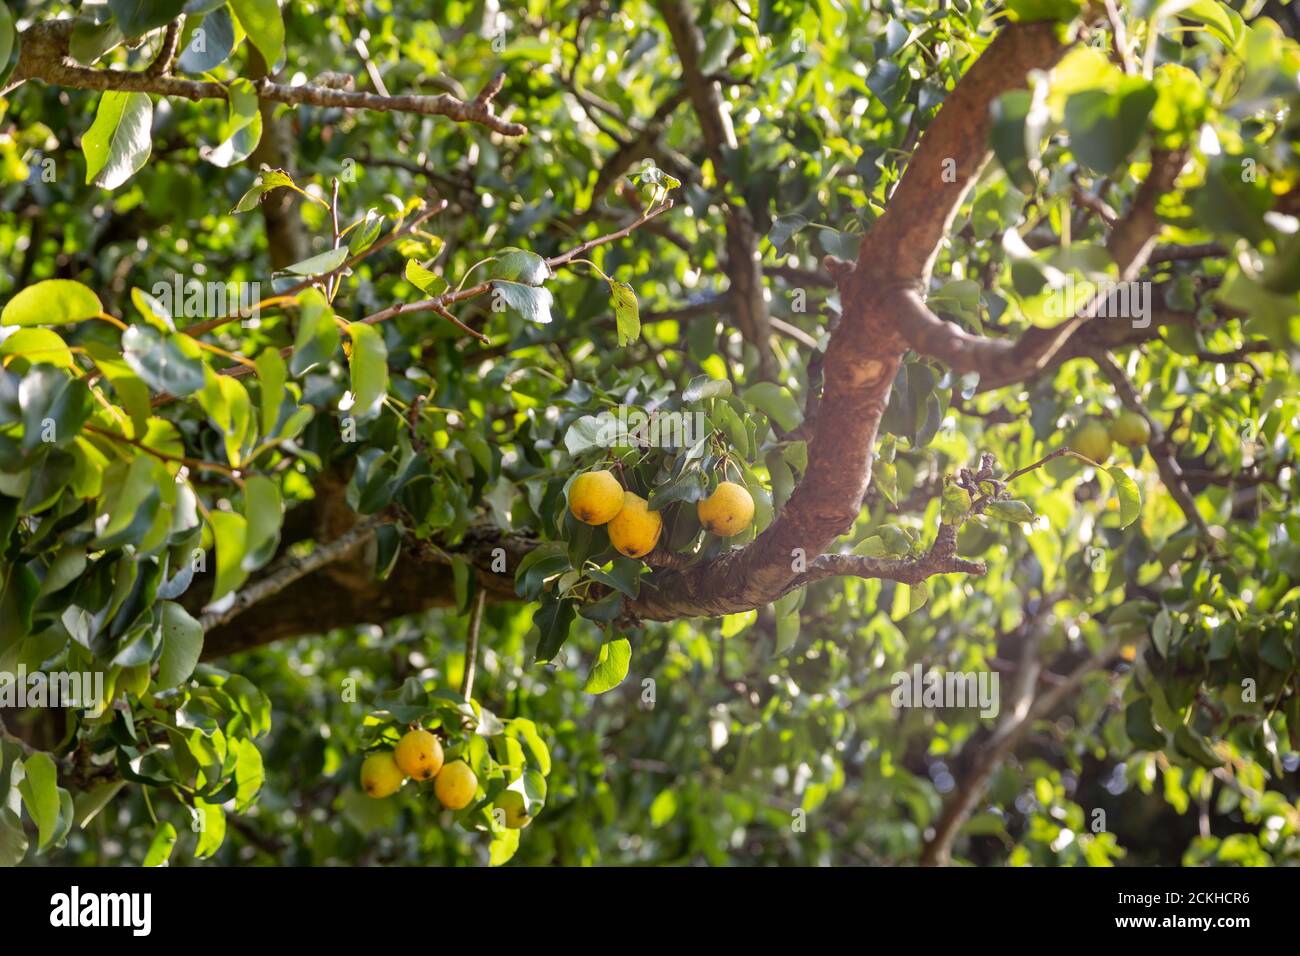 pears growing on a pear tree with sunlight shining through the leaves Stock Photo